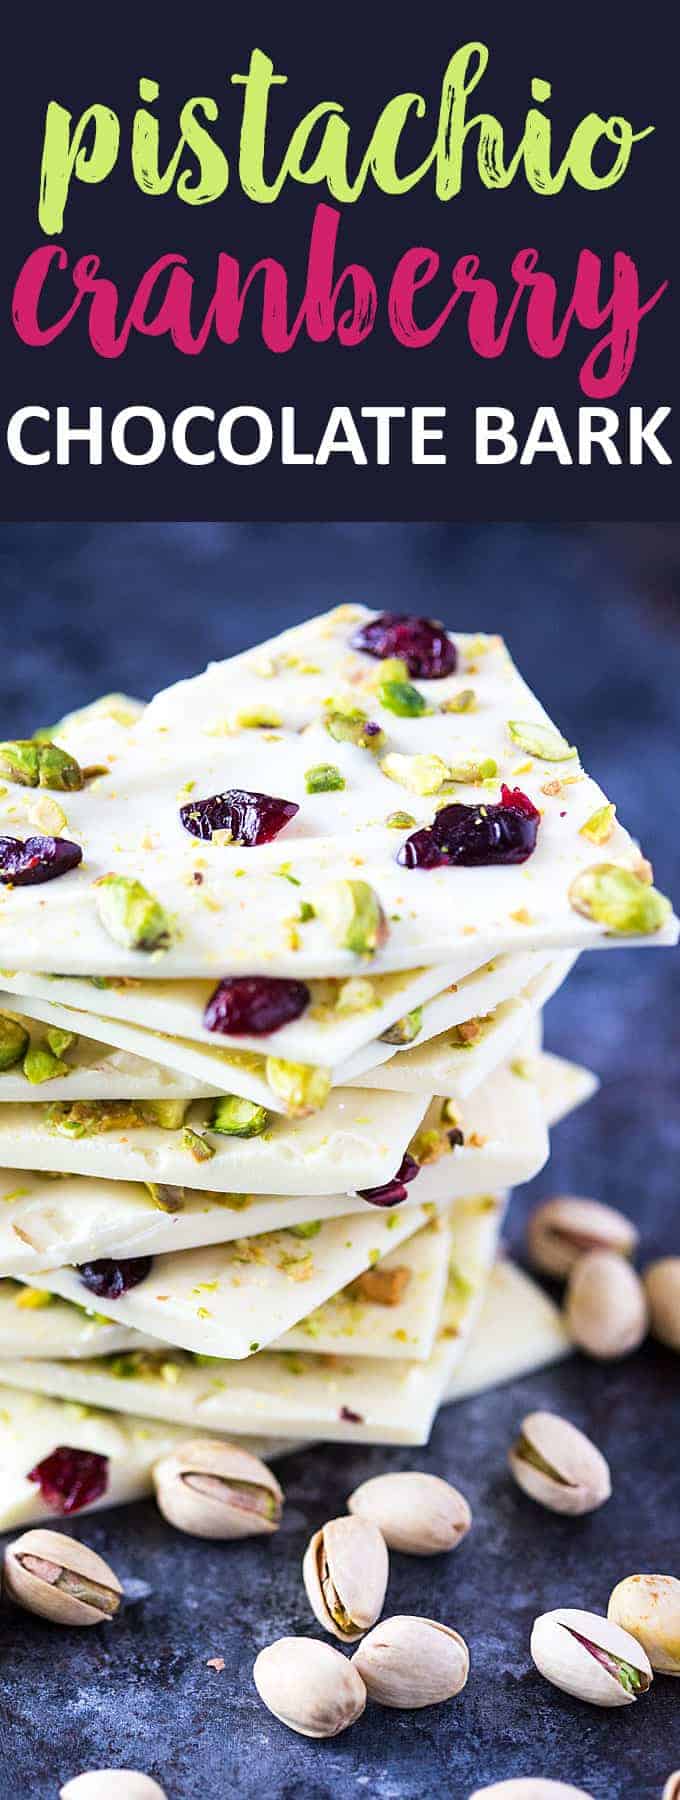 White chocolate bark with pistachios and dried cranberries - An easy and delicious 3-ingredient snack or dessert!